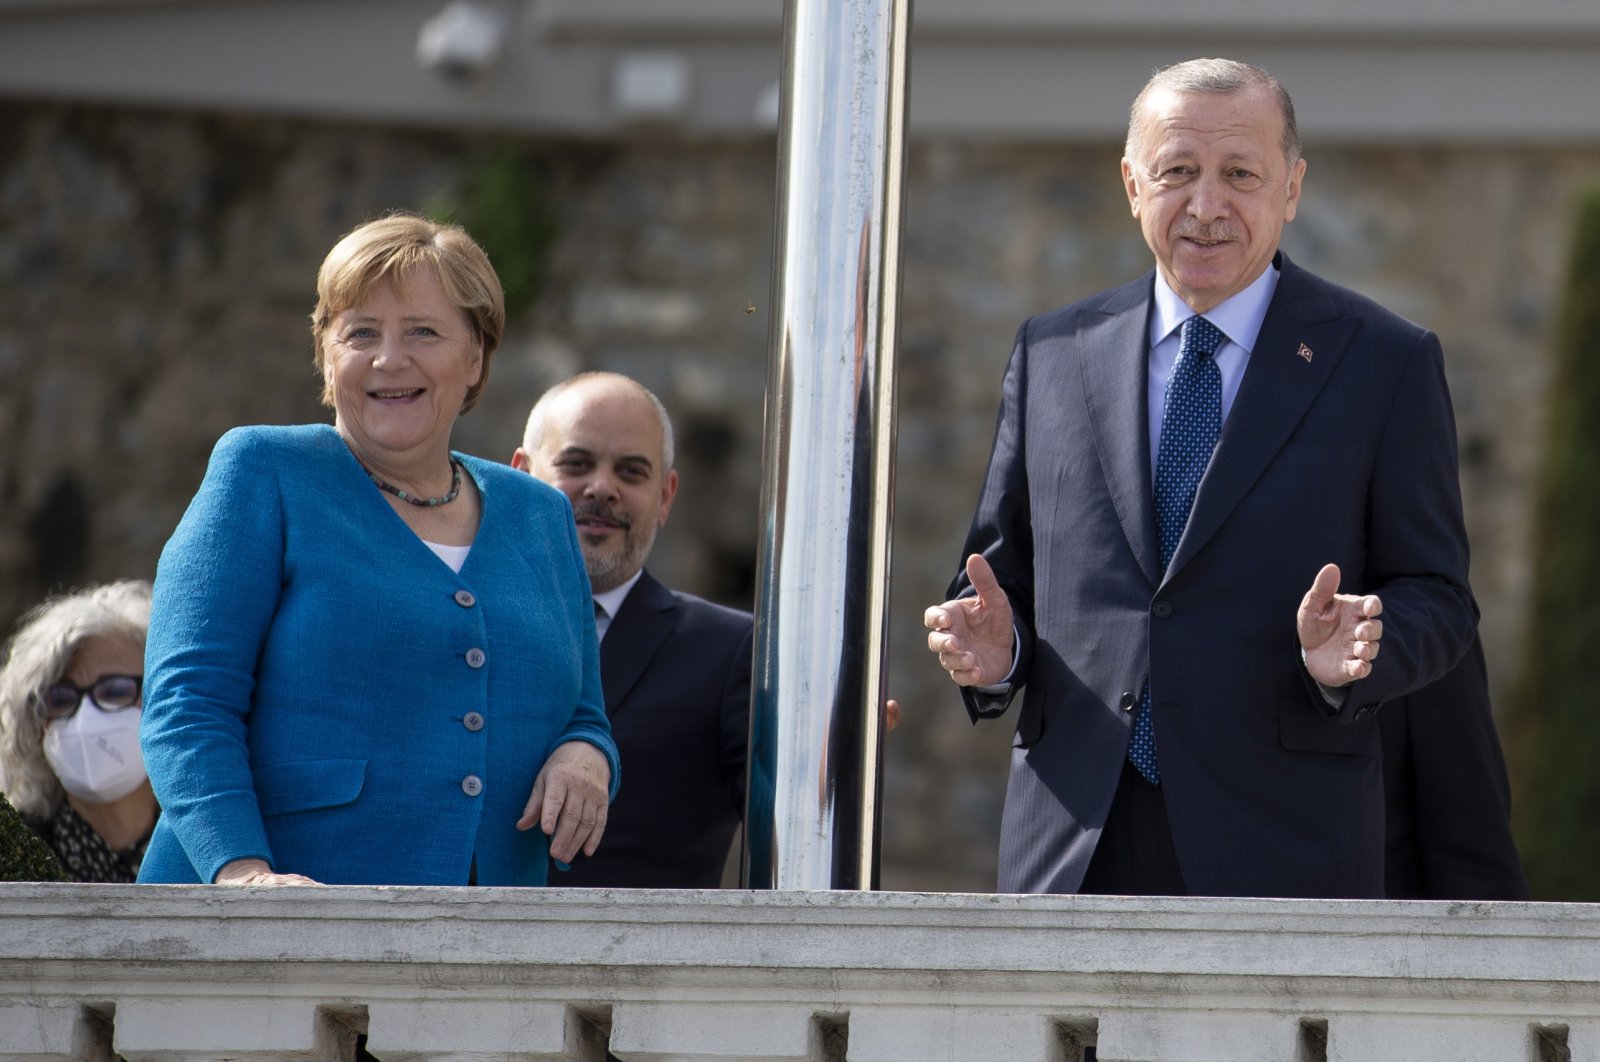 President Recep Tayyip Erdoğan and former German Chancellor Angela Merkel (L) pose for photographers before their meeting at the Huber mansion in Istanbul, Turkey, 16 October 2021. (EPA Photo)